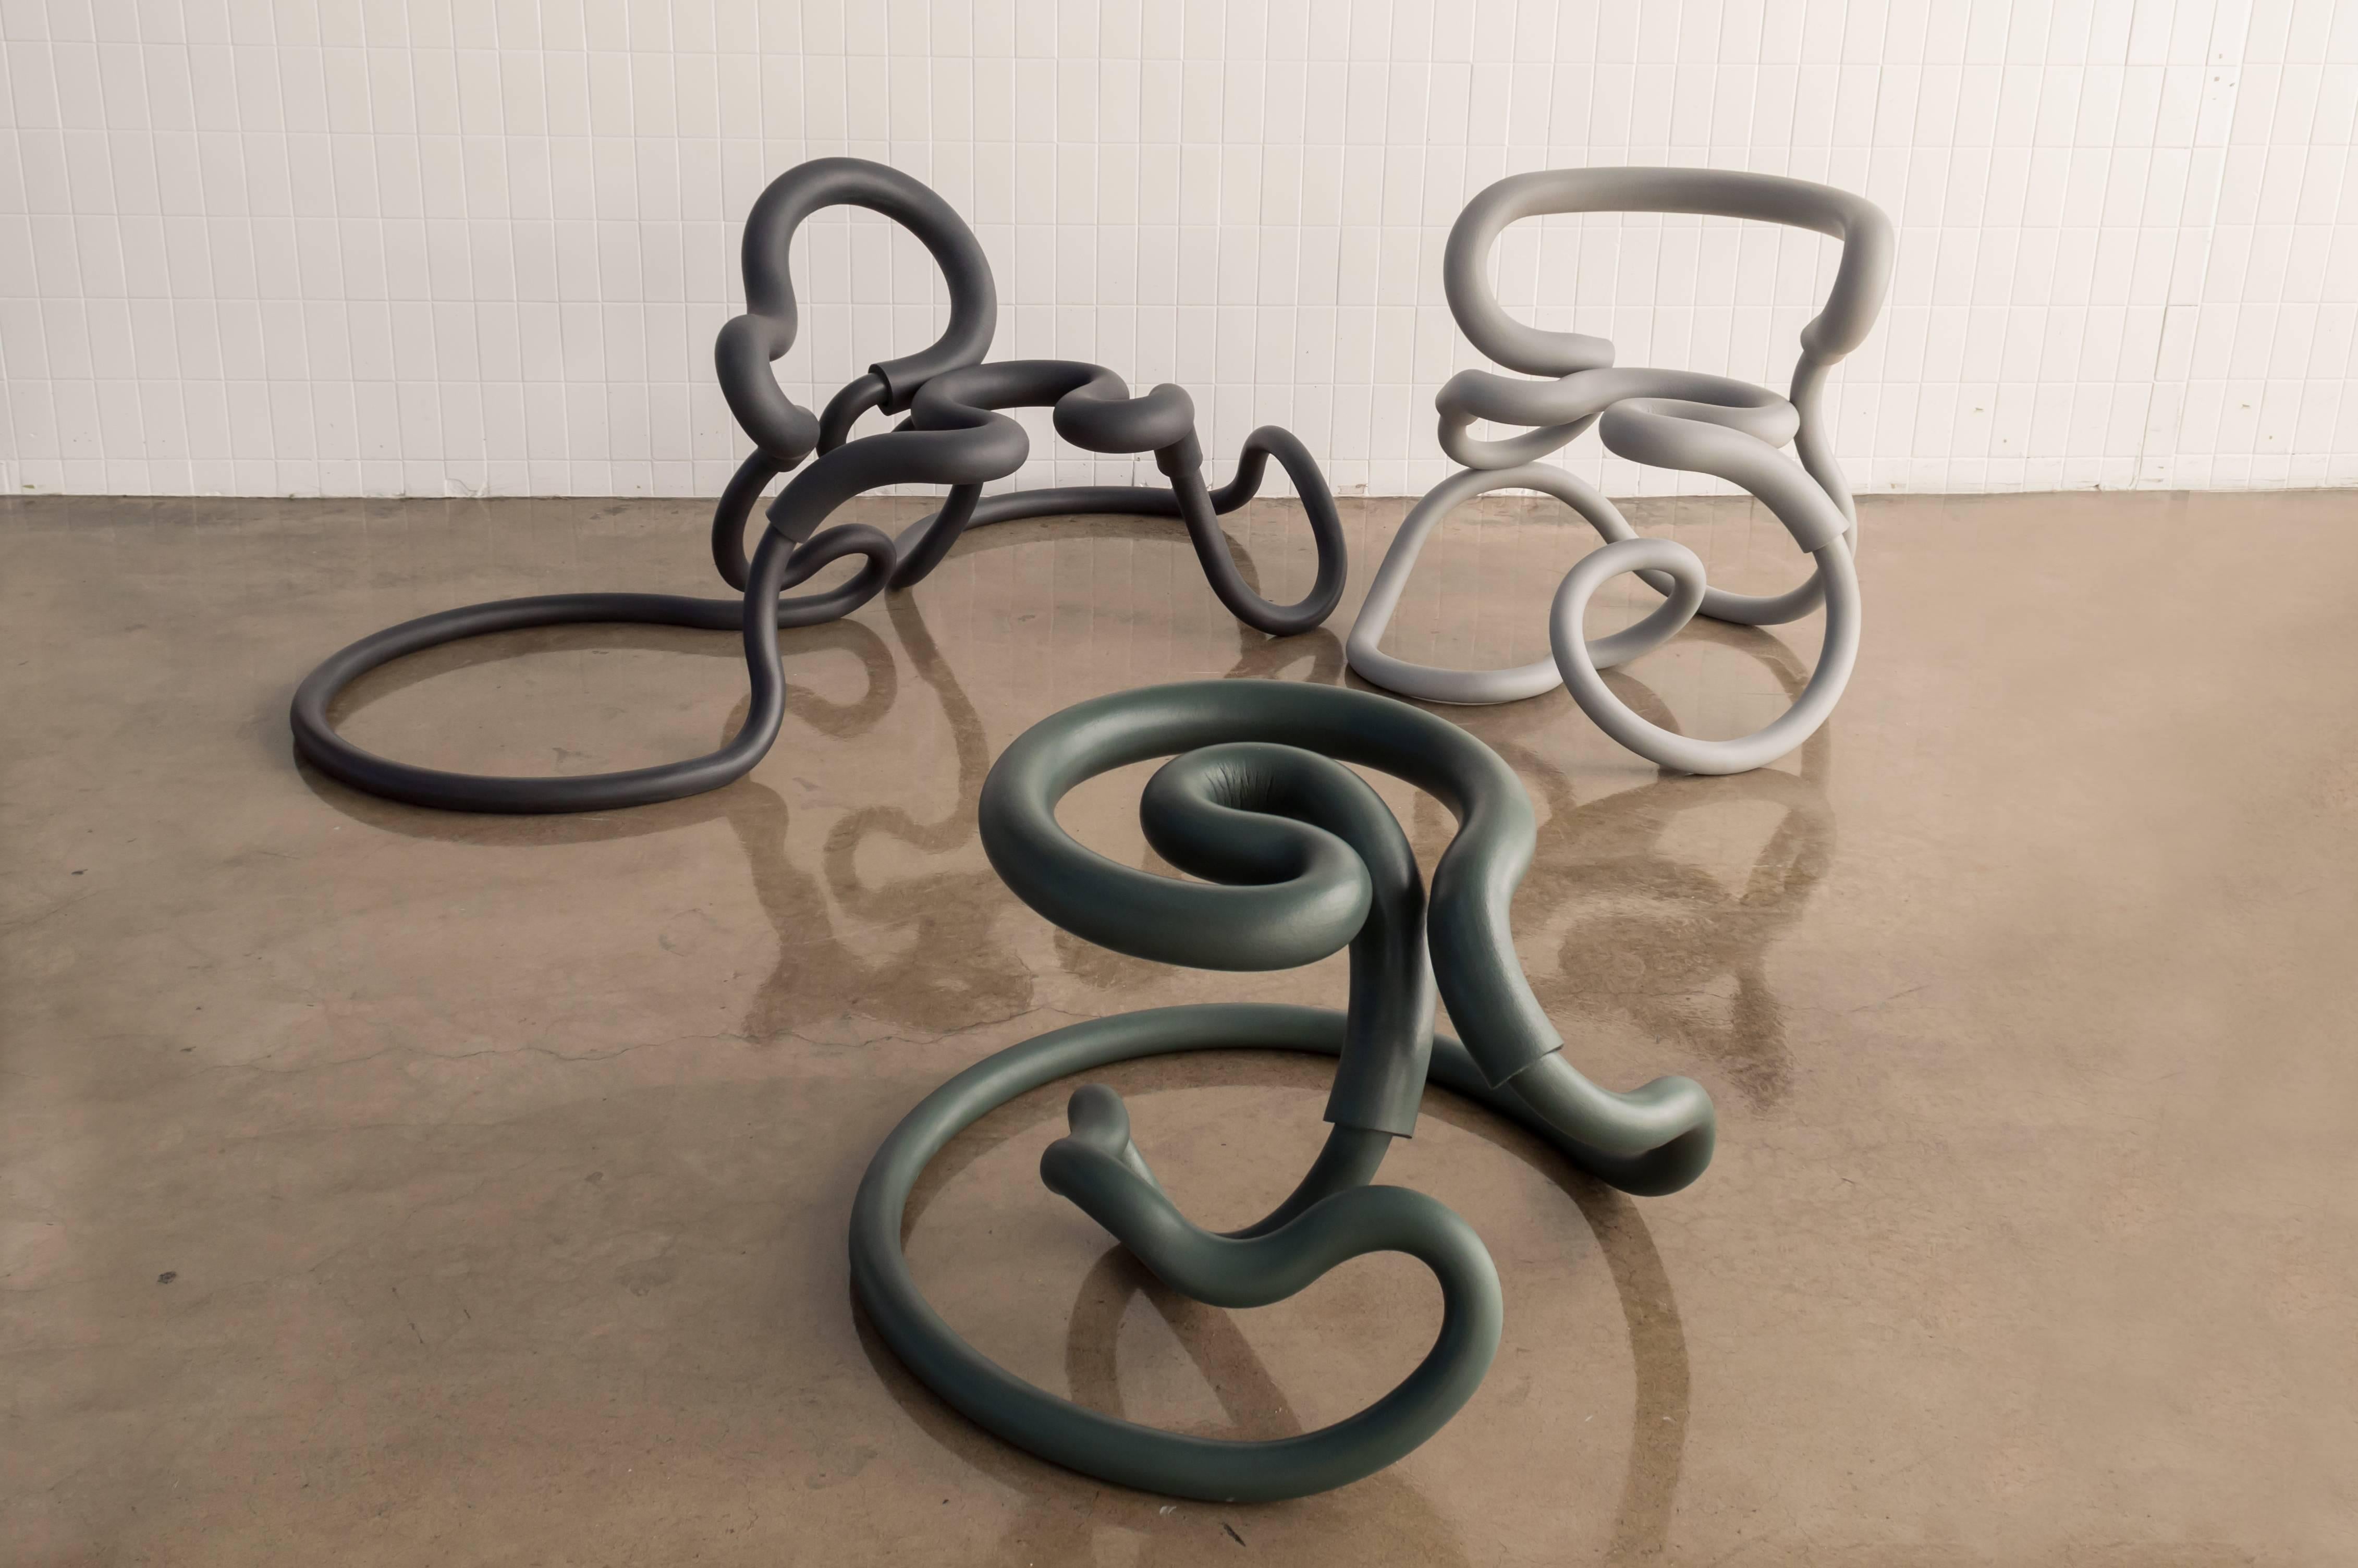 Aranda\Lasch continues to explore and test out various furniture forms from their latest Railing Series, a series of design pieces that utilize bent tubes and furnished with leather of foam outside. Railing Chair (R1 and R2) and Railing Stool (R3)